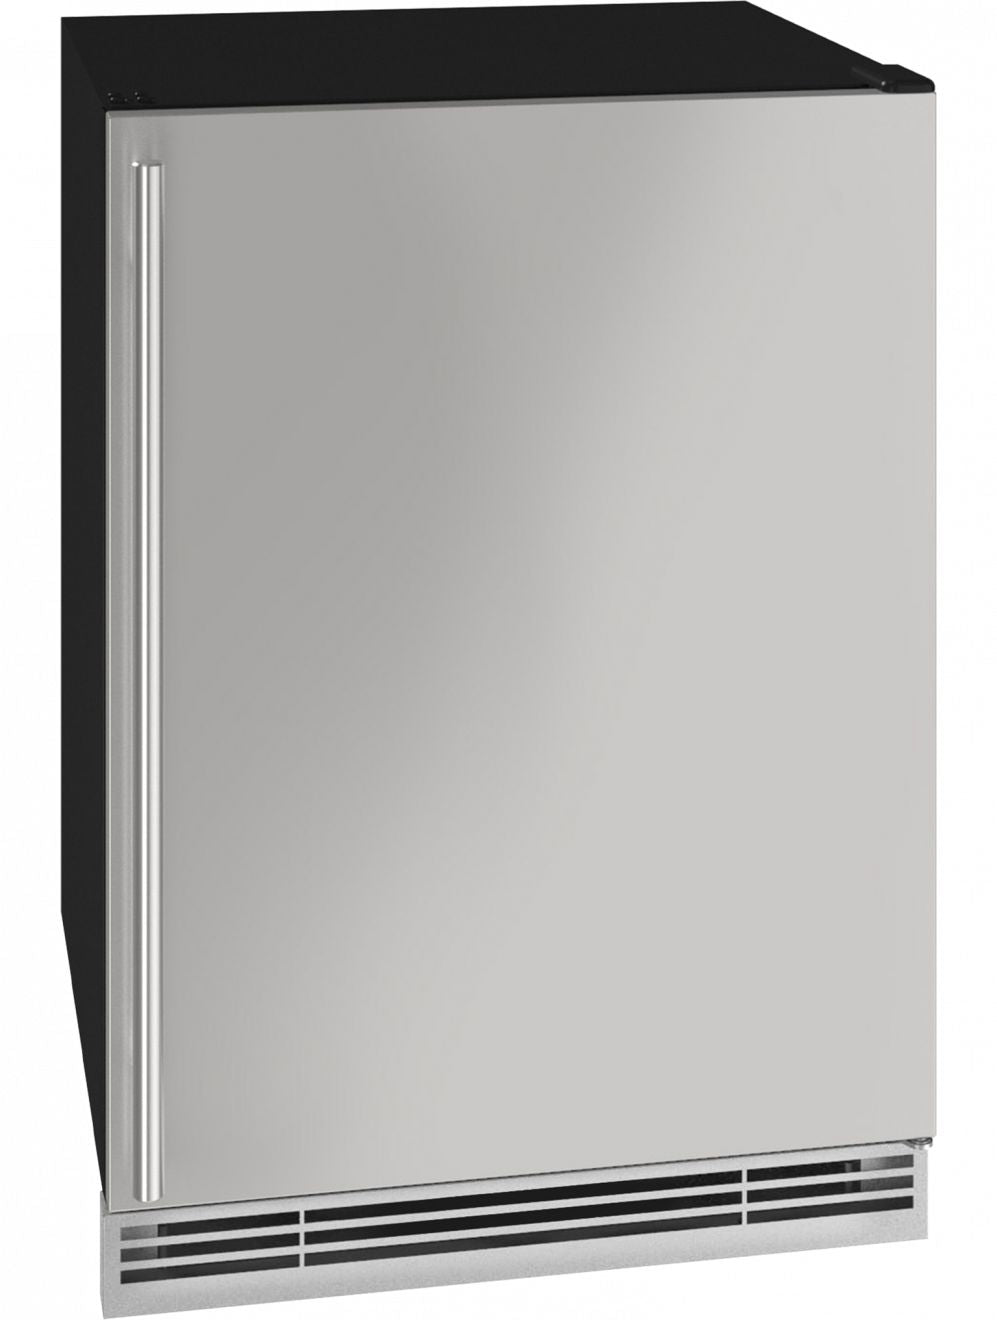 U-Line® 5.7 Cu. Ft. Stainless Steel Under the Counter Refrigerator